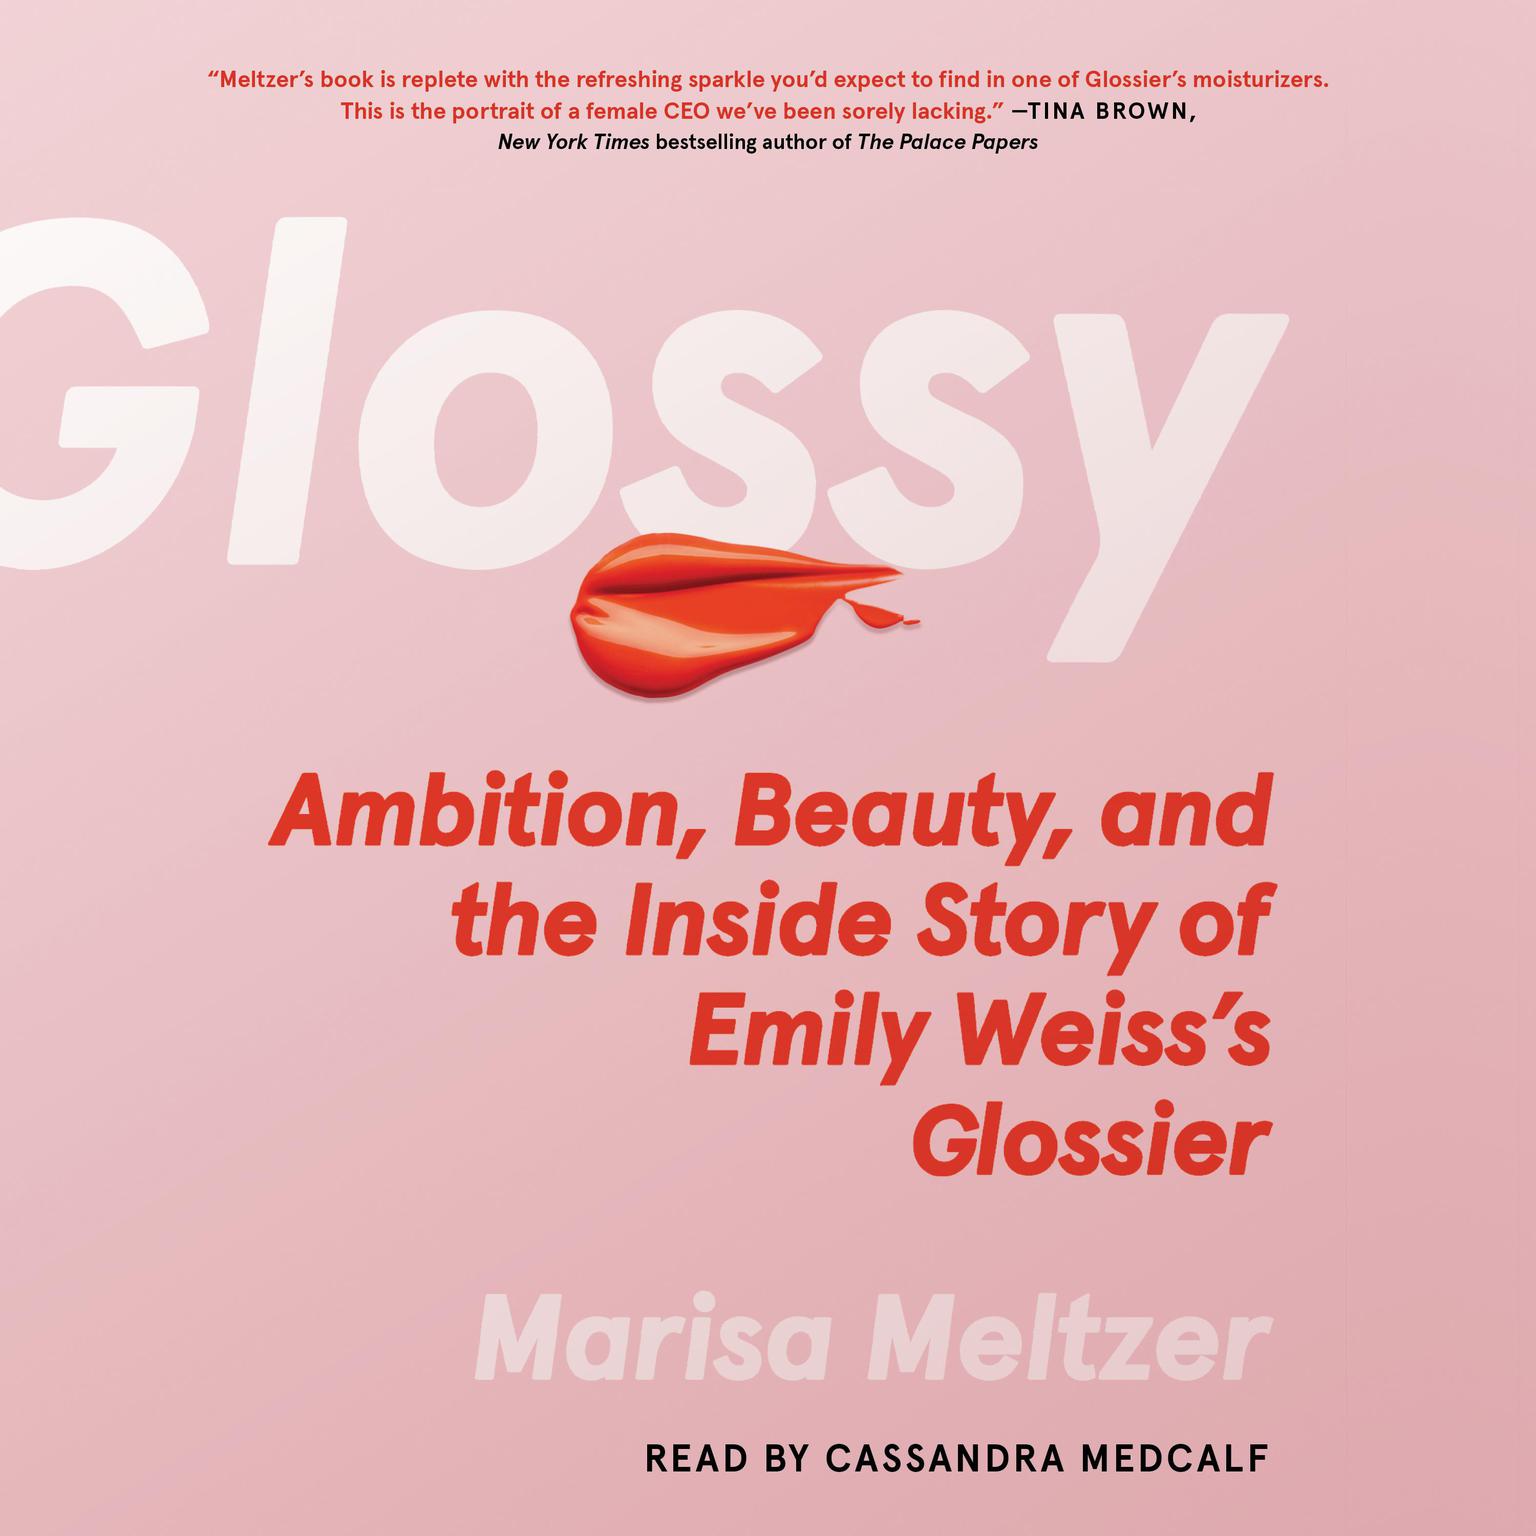 Glossy: Ambition, Beauty, and the Inside Story of Emily Weiss’s Glossier Audiobook, by Marisa Meltzer